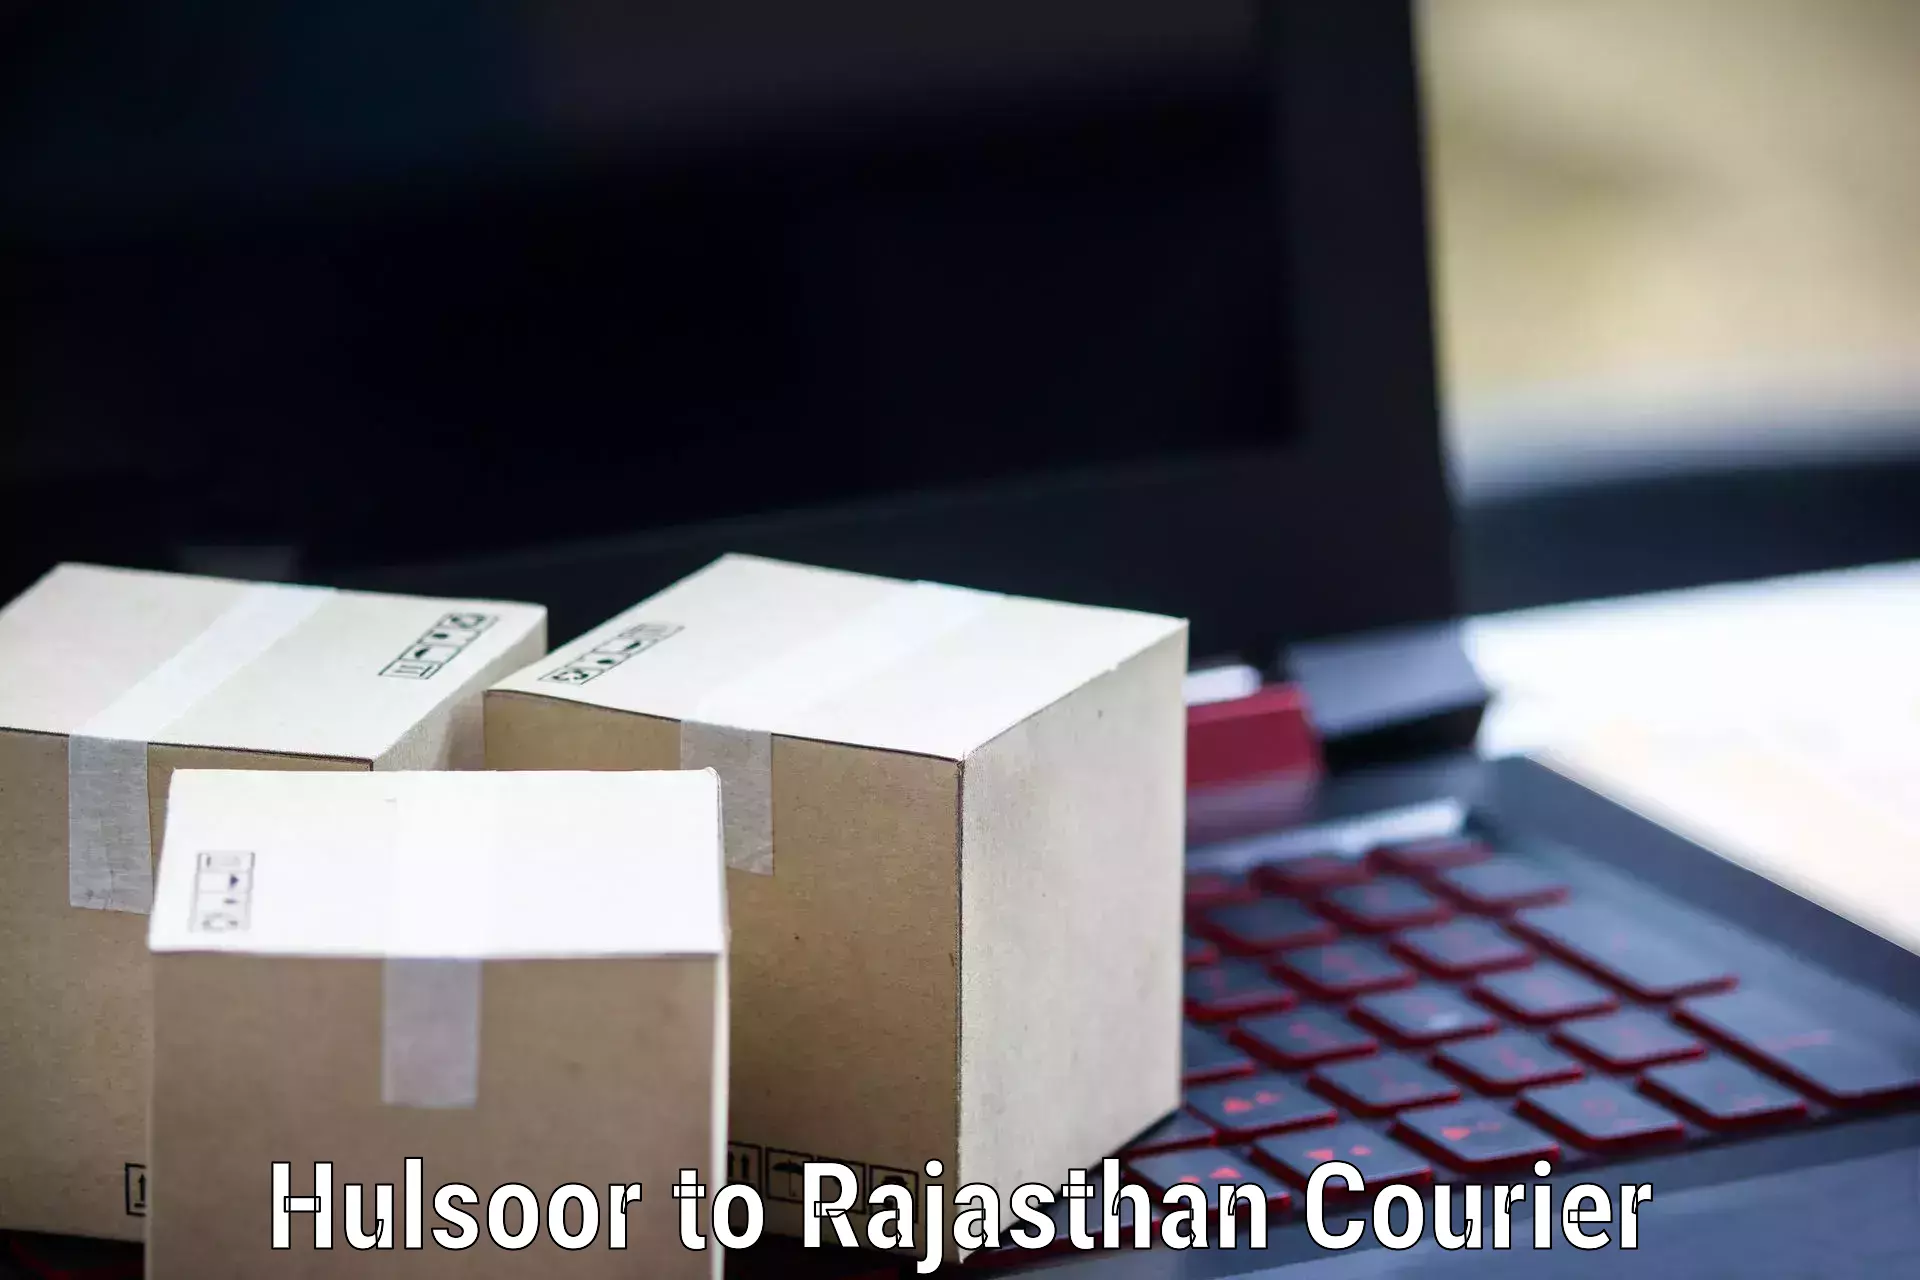 Reliable delivery network Hulsoor to Udaipur